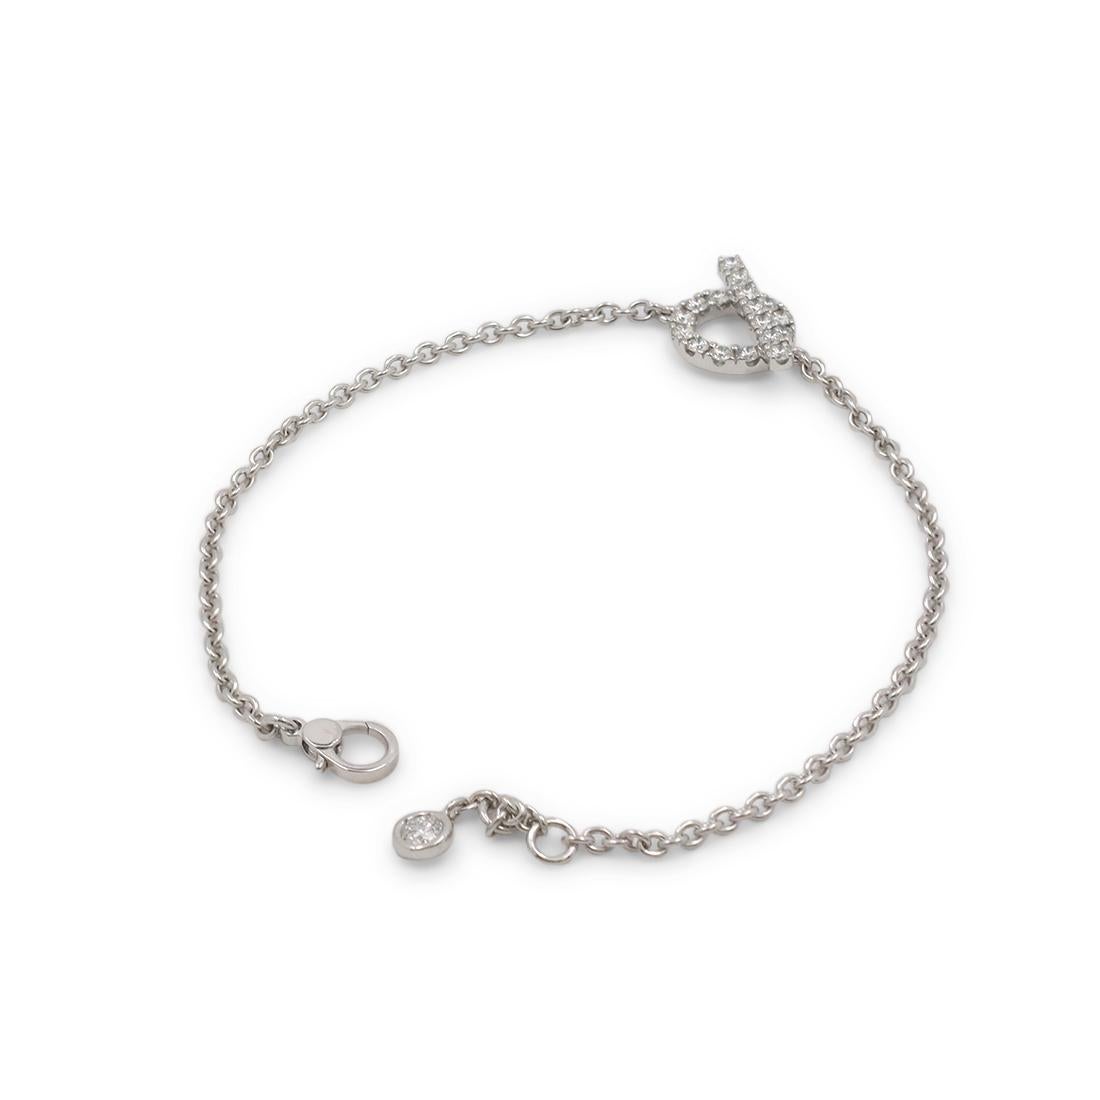 Authentic Hermès 'Finesse' bracelet crafted in 18 karat white gold and set with approximately 0.55 carats of high-quality diamonds. Featuring a motif inspired by a boat anchor, the bracelet measures 7 inches in length. Size 6 3/4 US, 17.5 EU. Signed